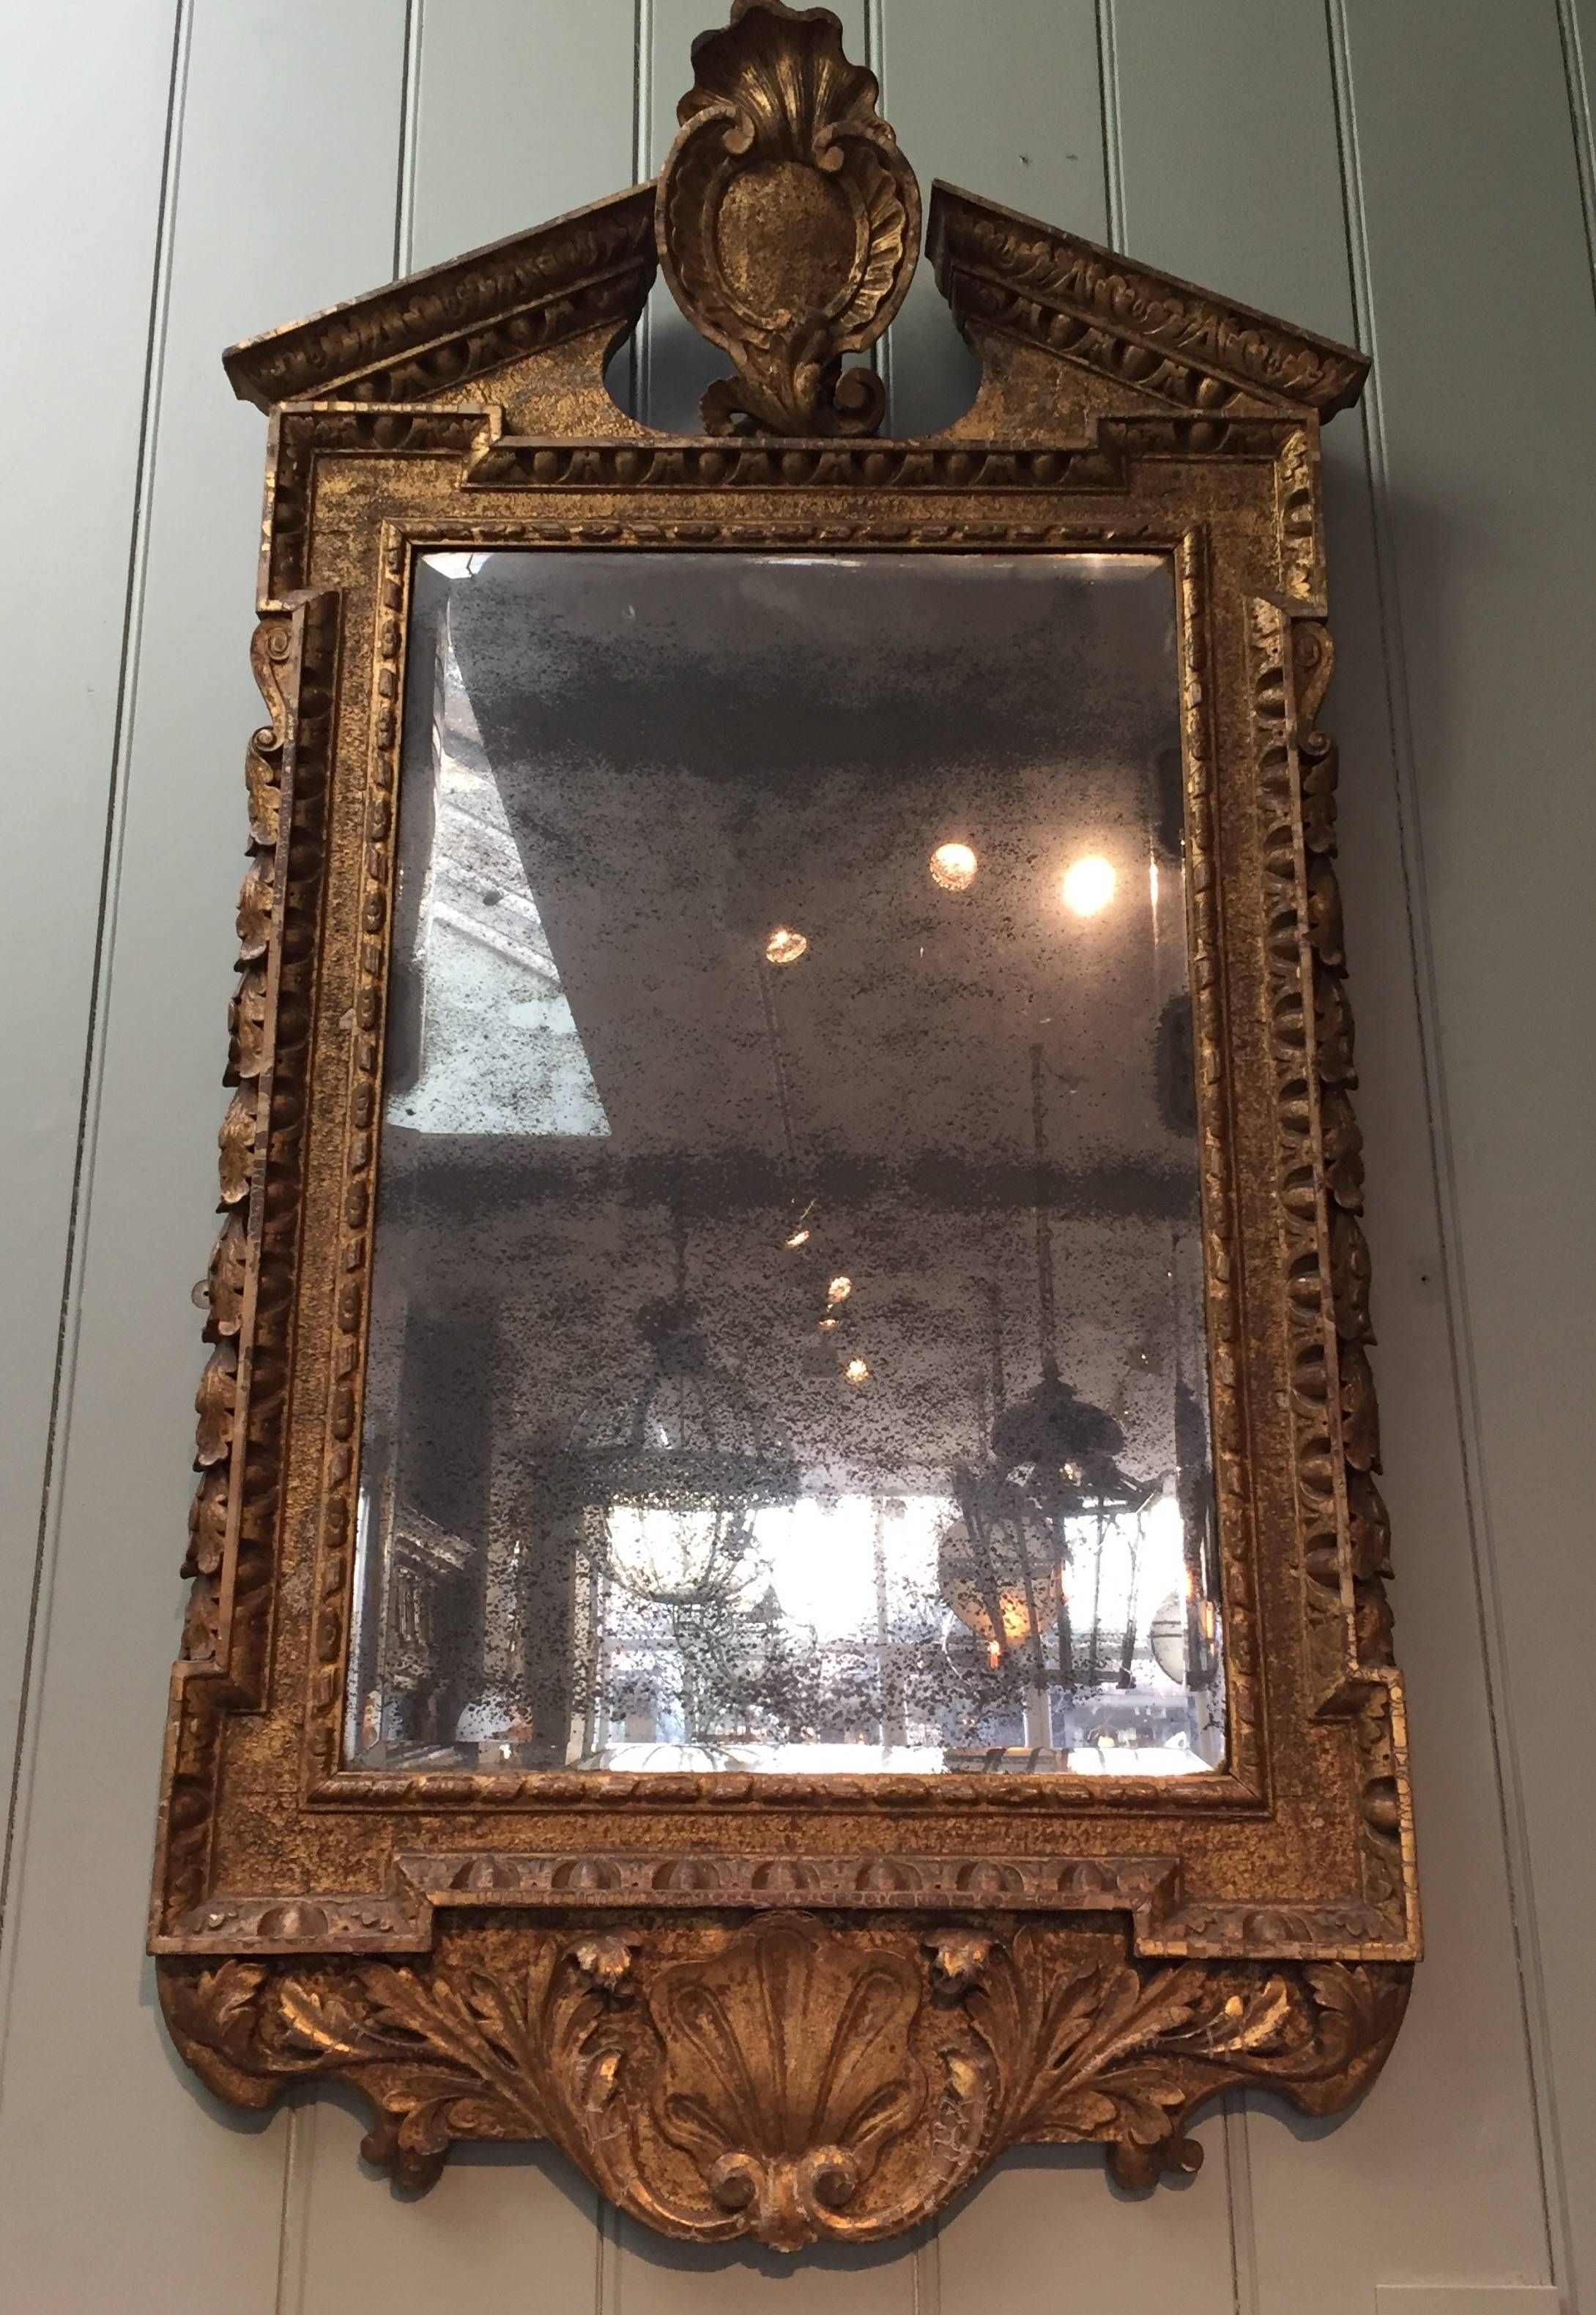 Overmantles, Antique Mirrors And Fireplaces – Jamb Throughout Antique Mirrors (View 9 of 25)